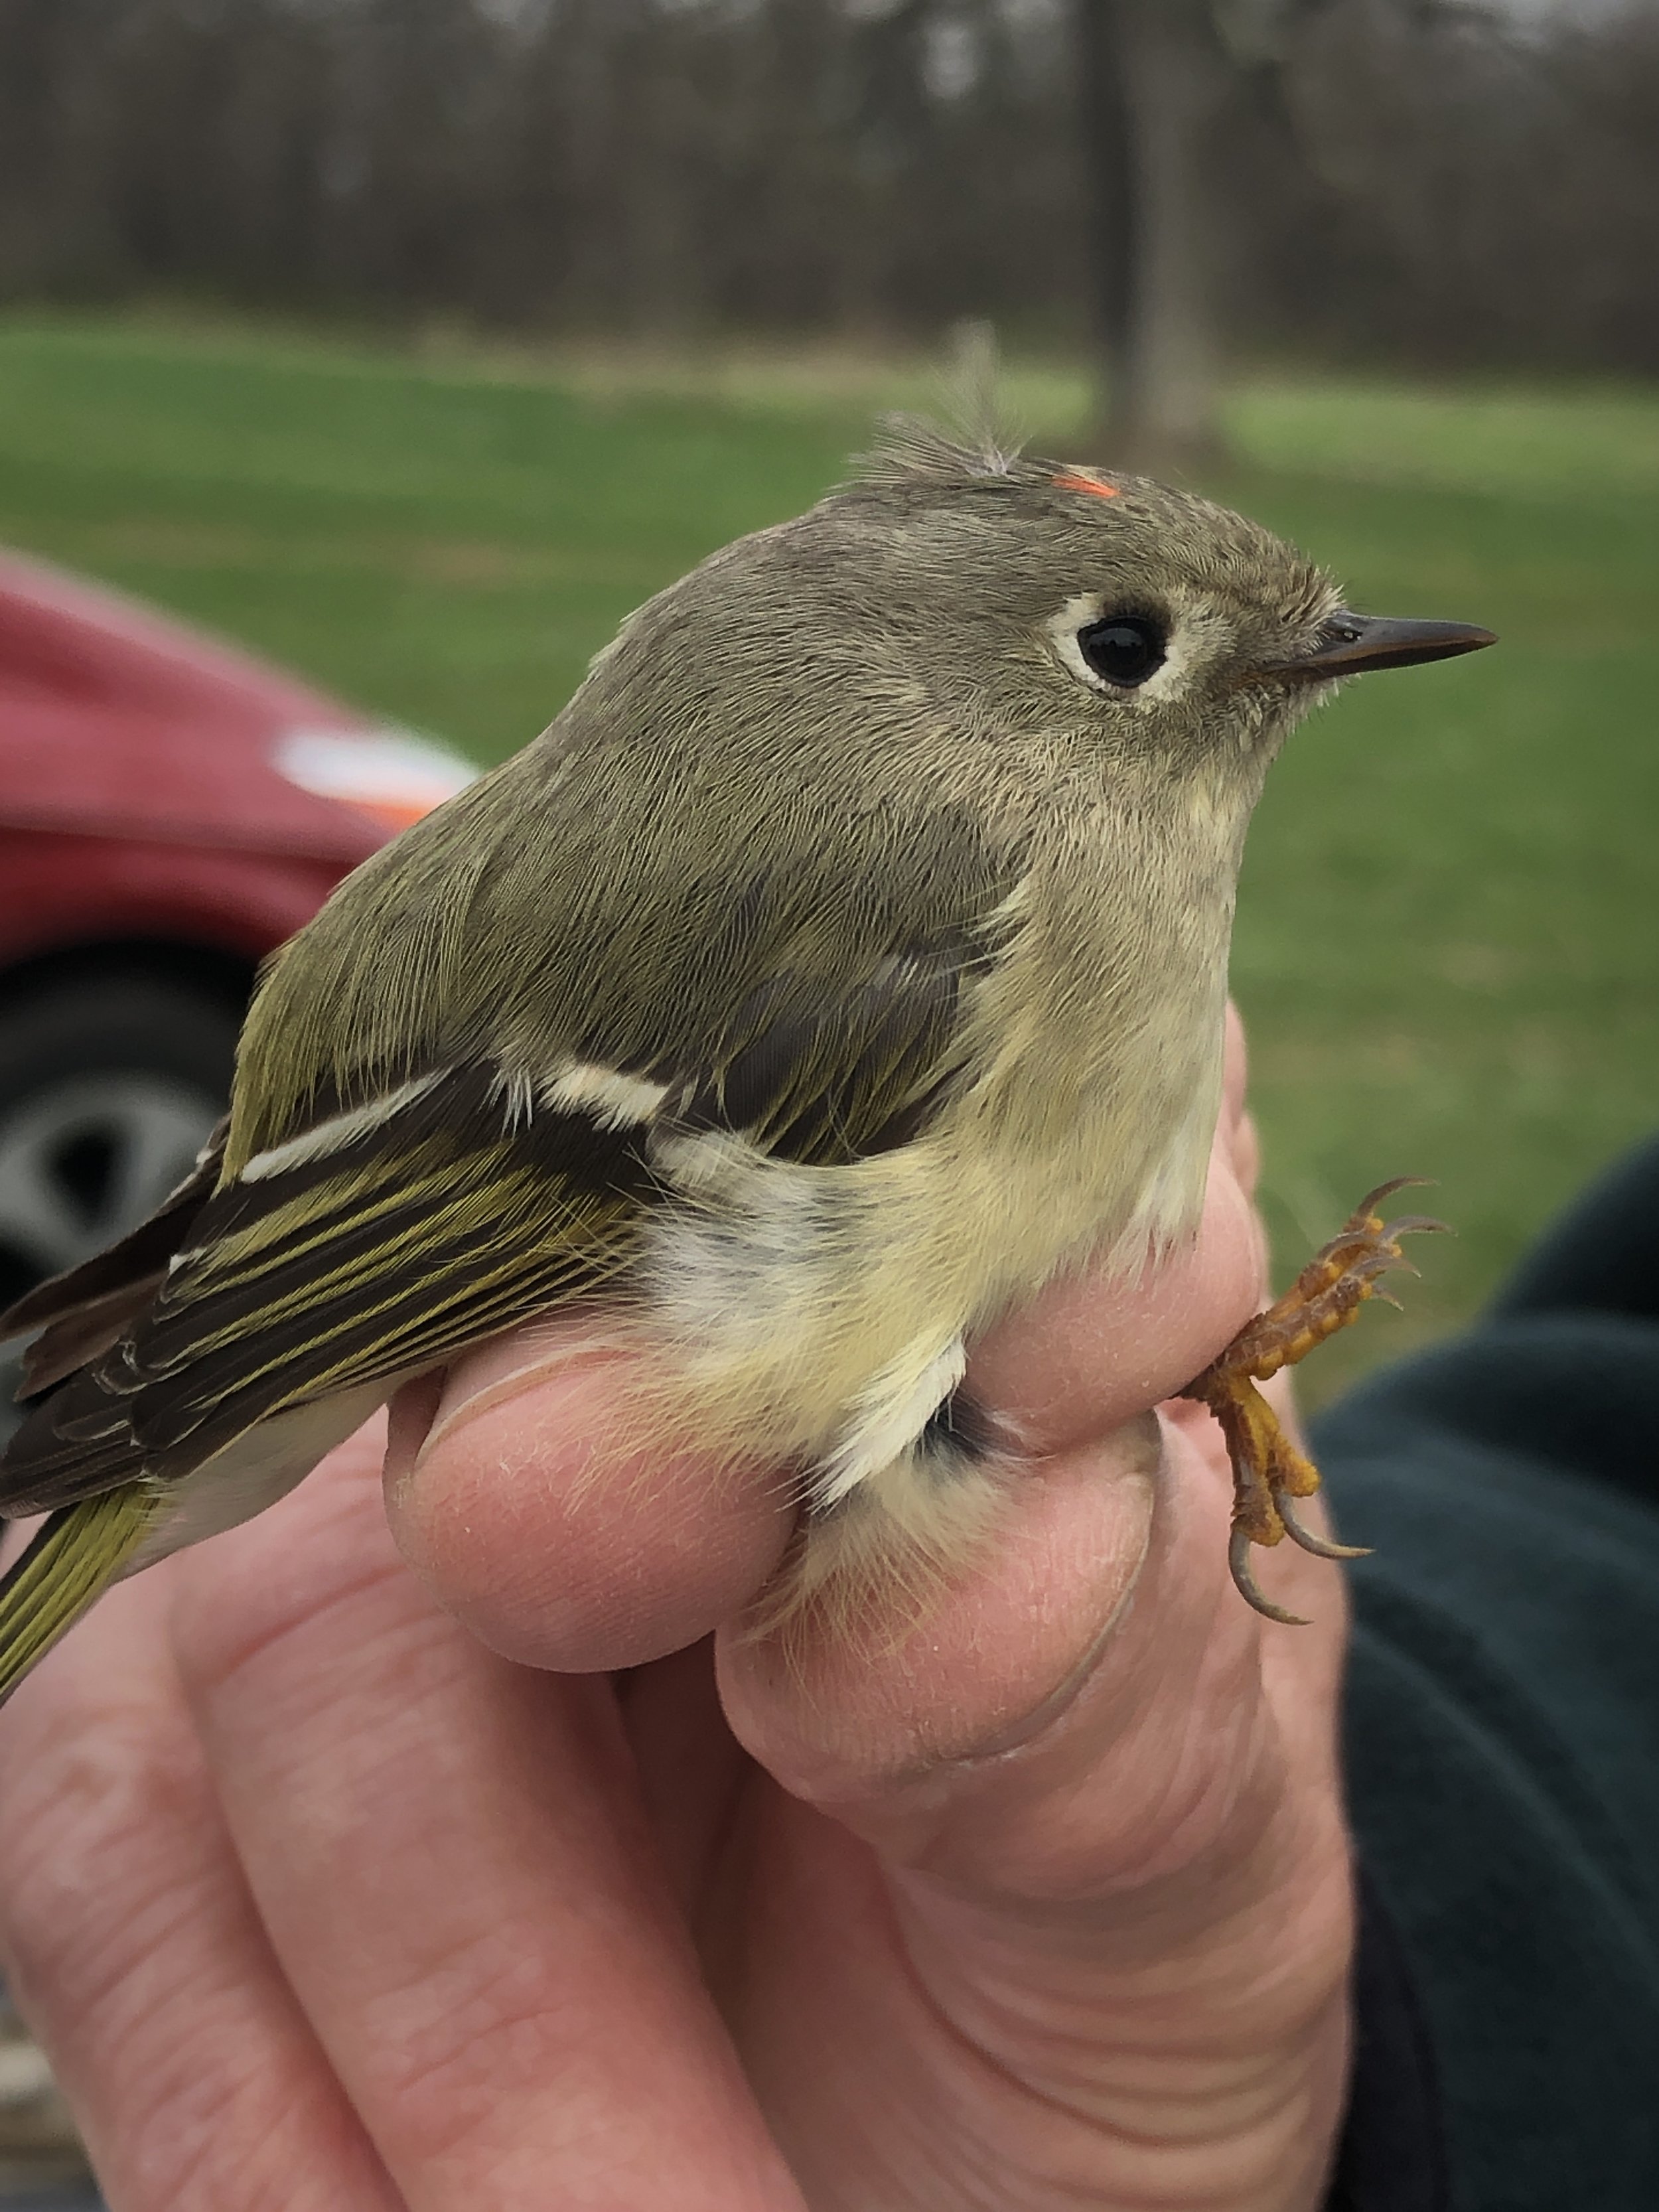 Ruby-crowned kinglet being held after being banded